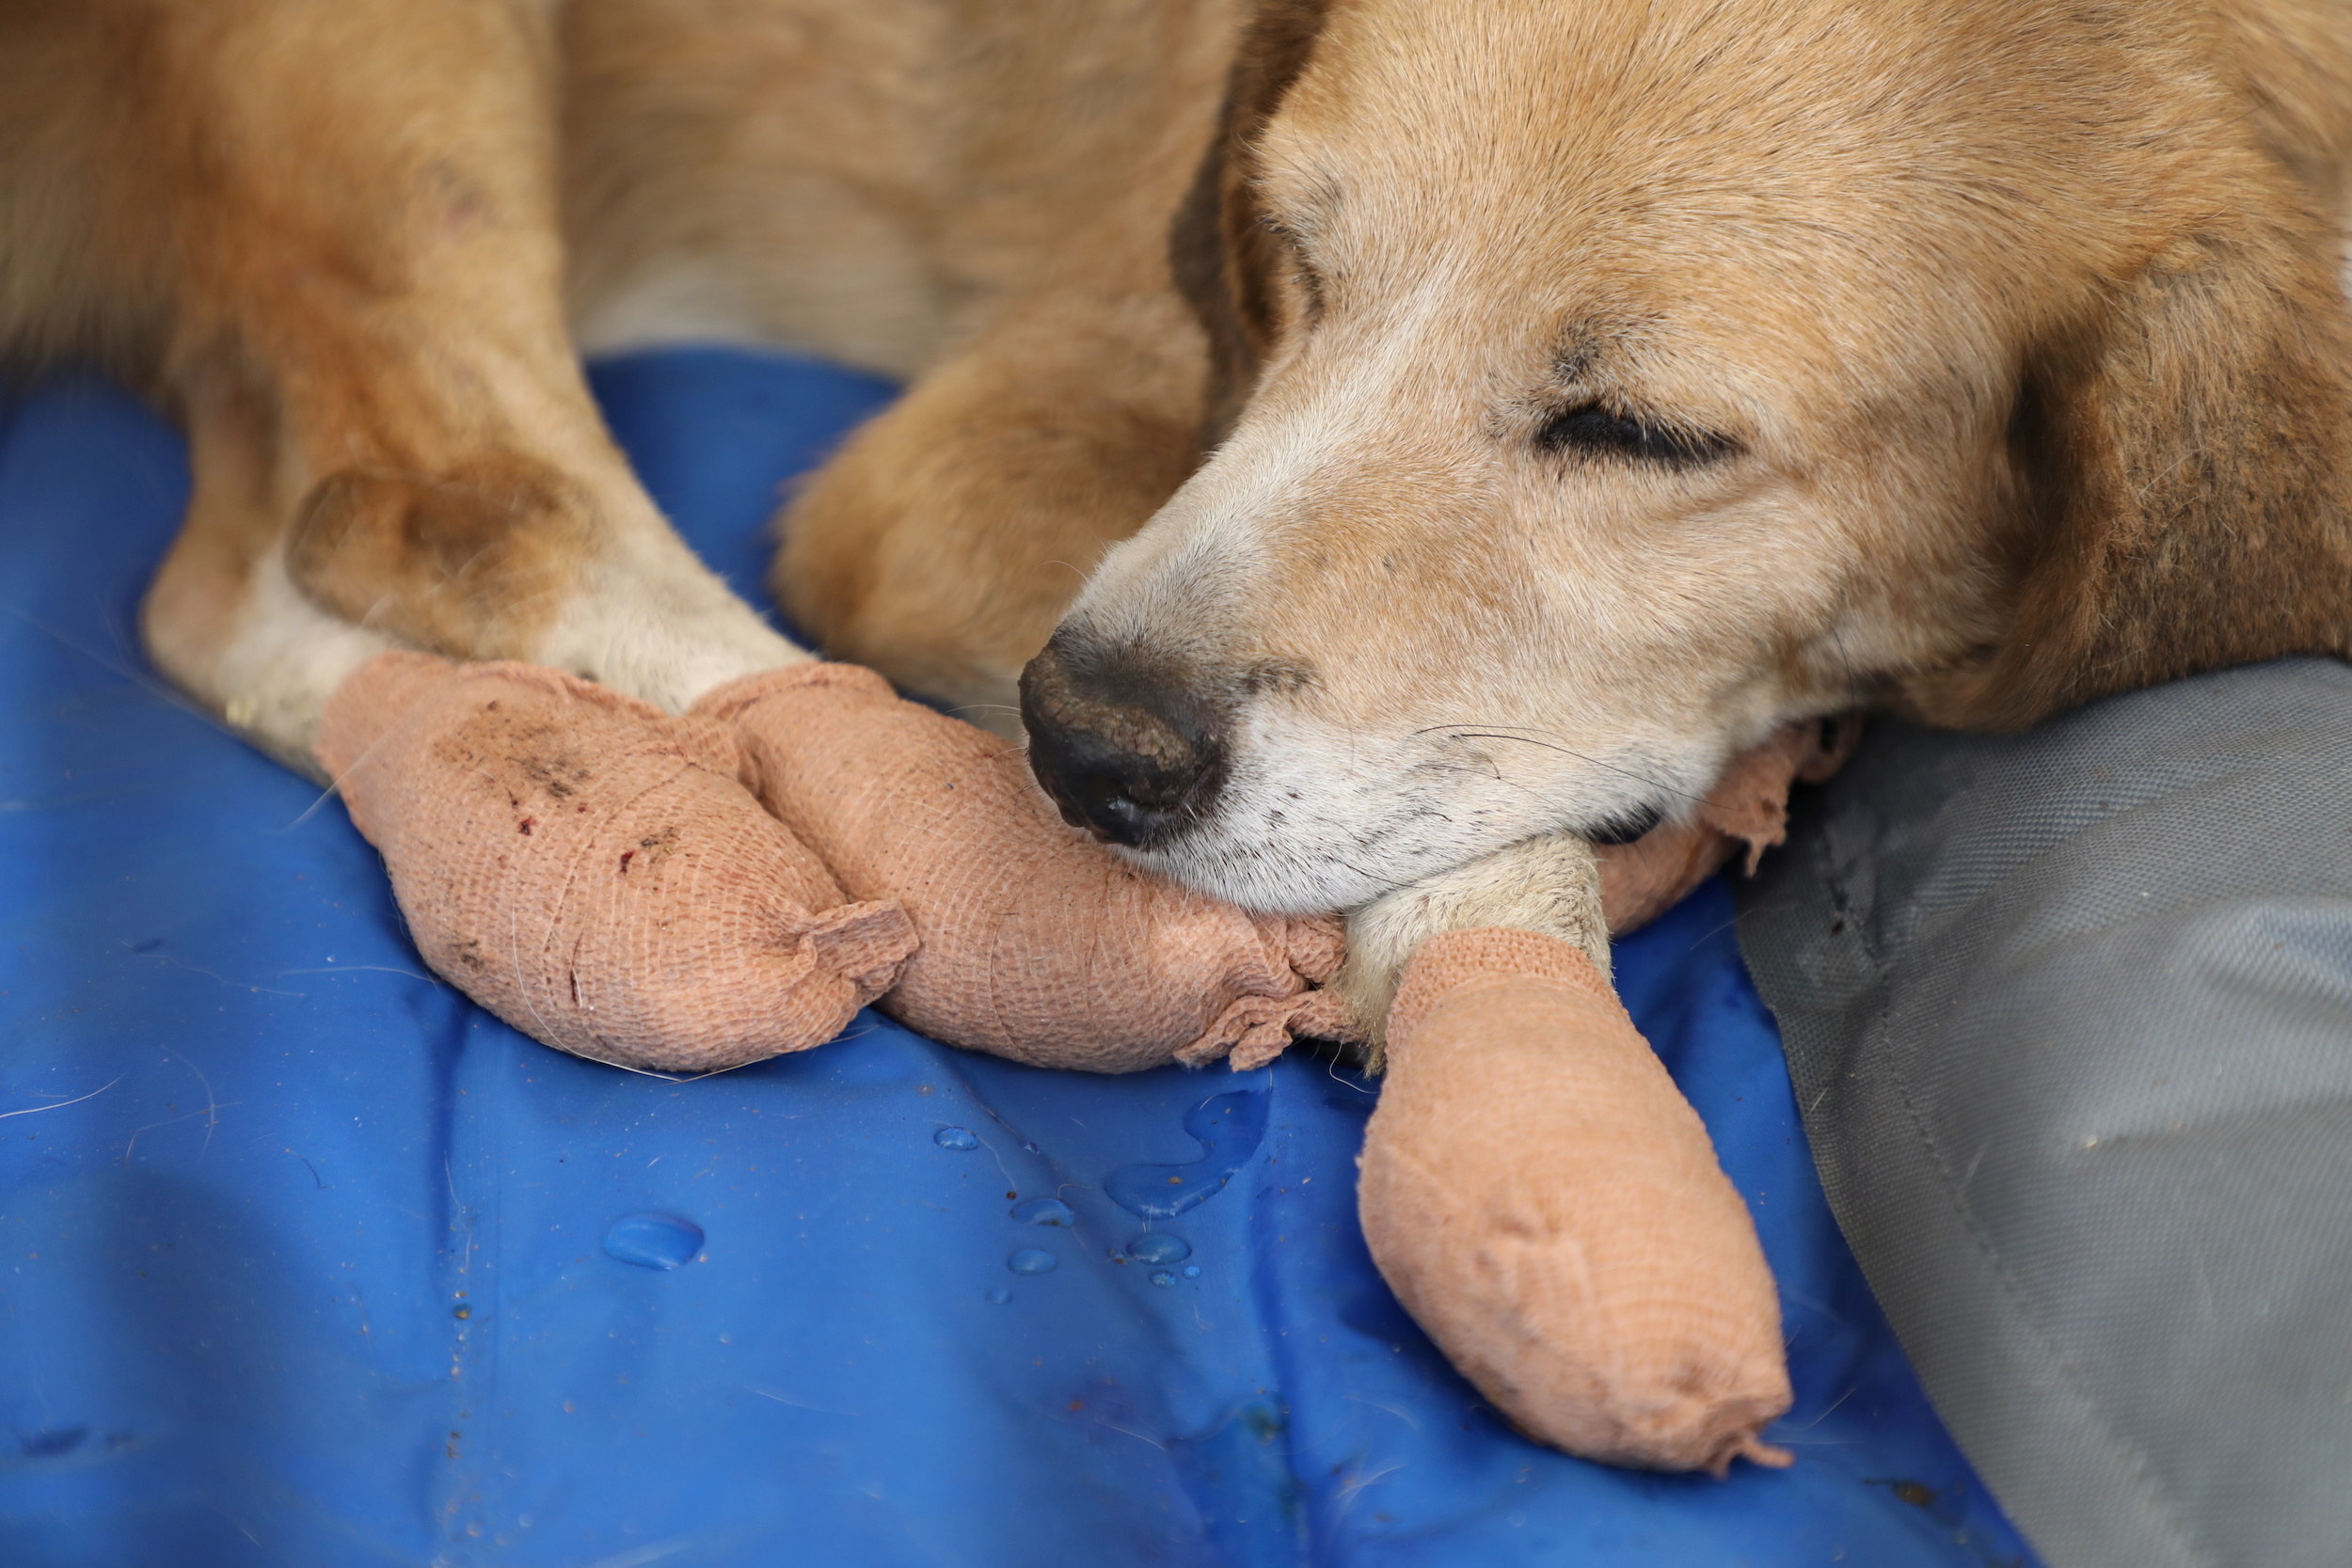 A dog sleeps with its paws wrapped in bandages after suffering an injury from a wildfire